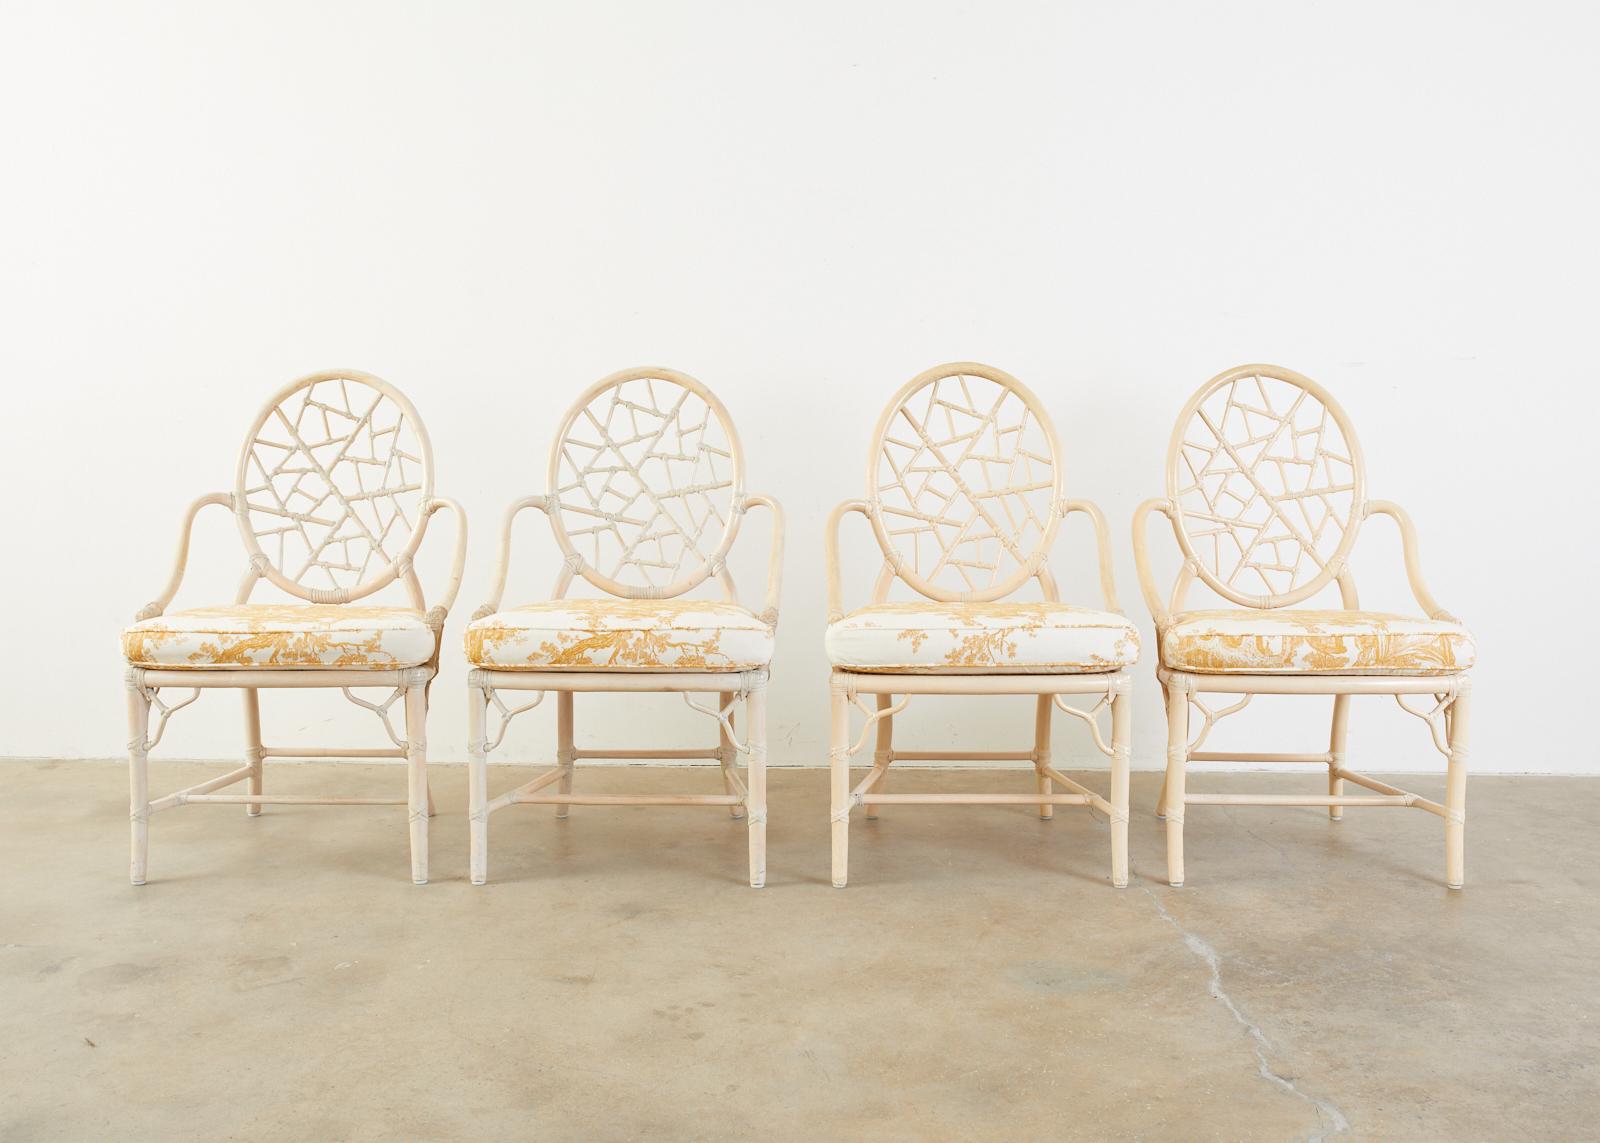 Fantastic set of four genuine McGuire bamboo rattan dining chairs. The chairs feature an iconic design by Elinor McGuire of a cracked ice open fretwork back. Handcrafted from pieces of rattan joined by leather rawhide laces. The chairs have a caned